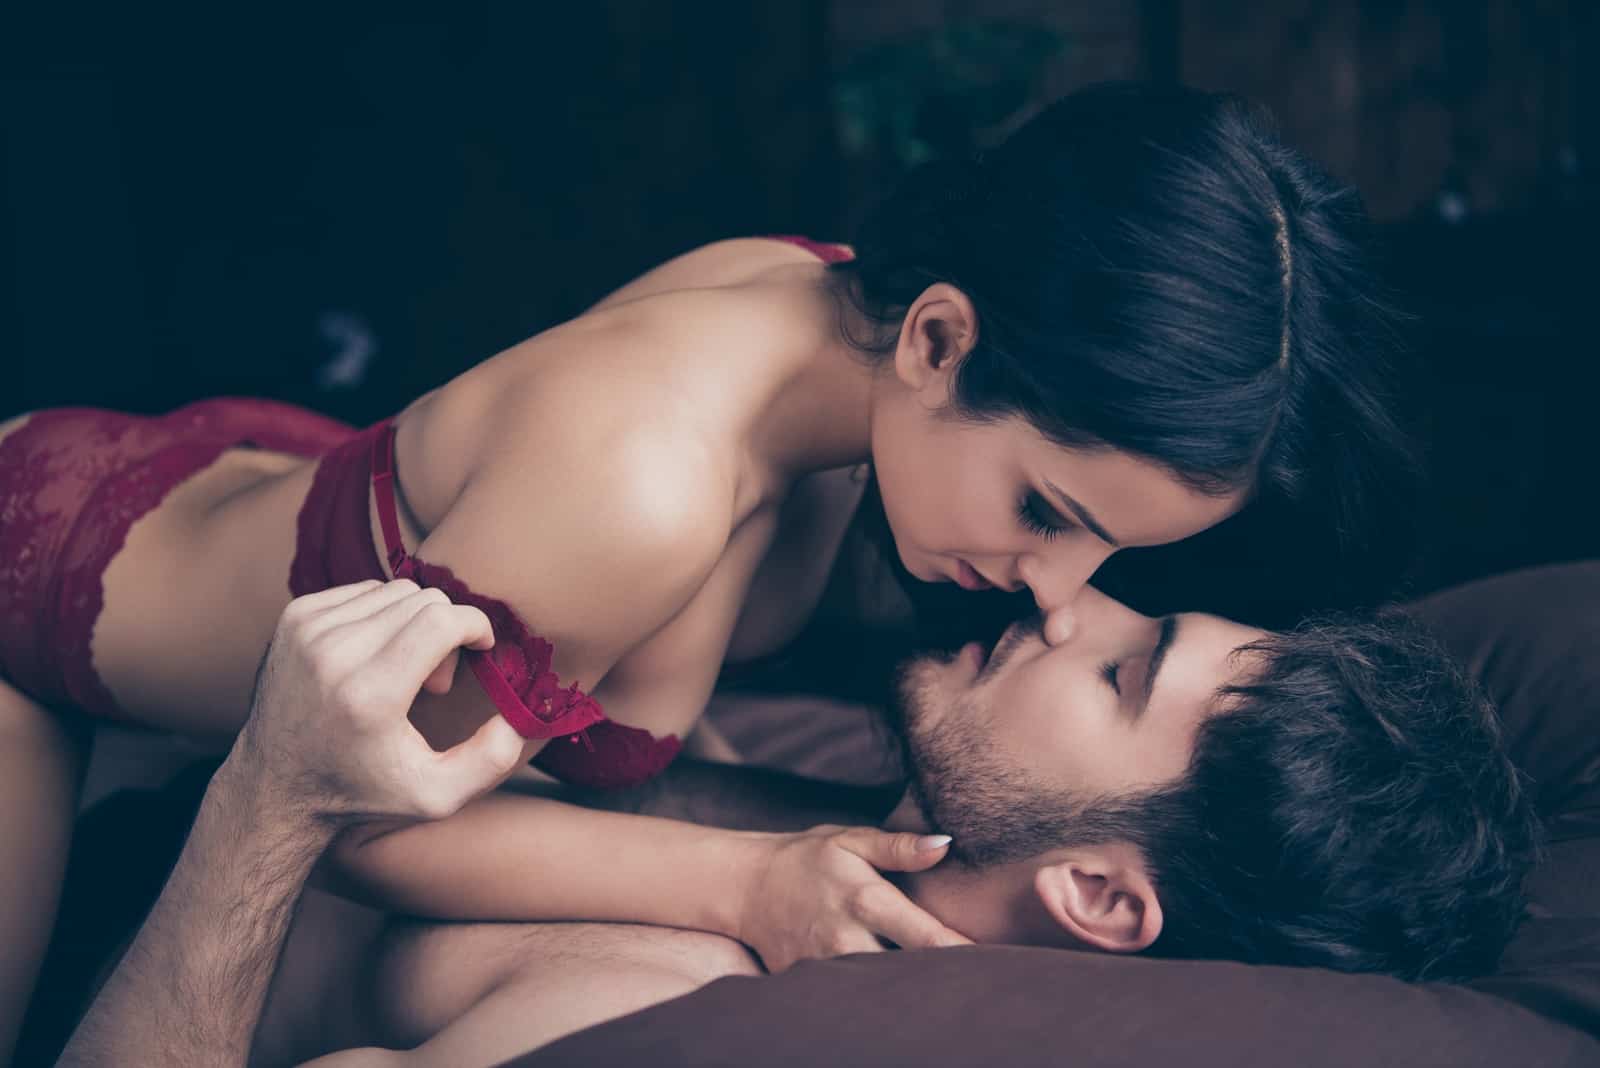 woman in red bra about to kiss man while laying on bed